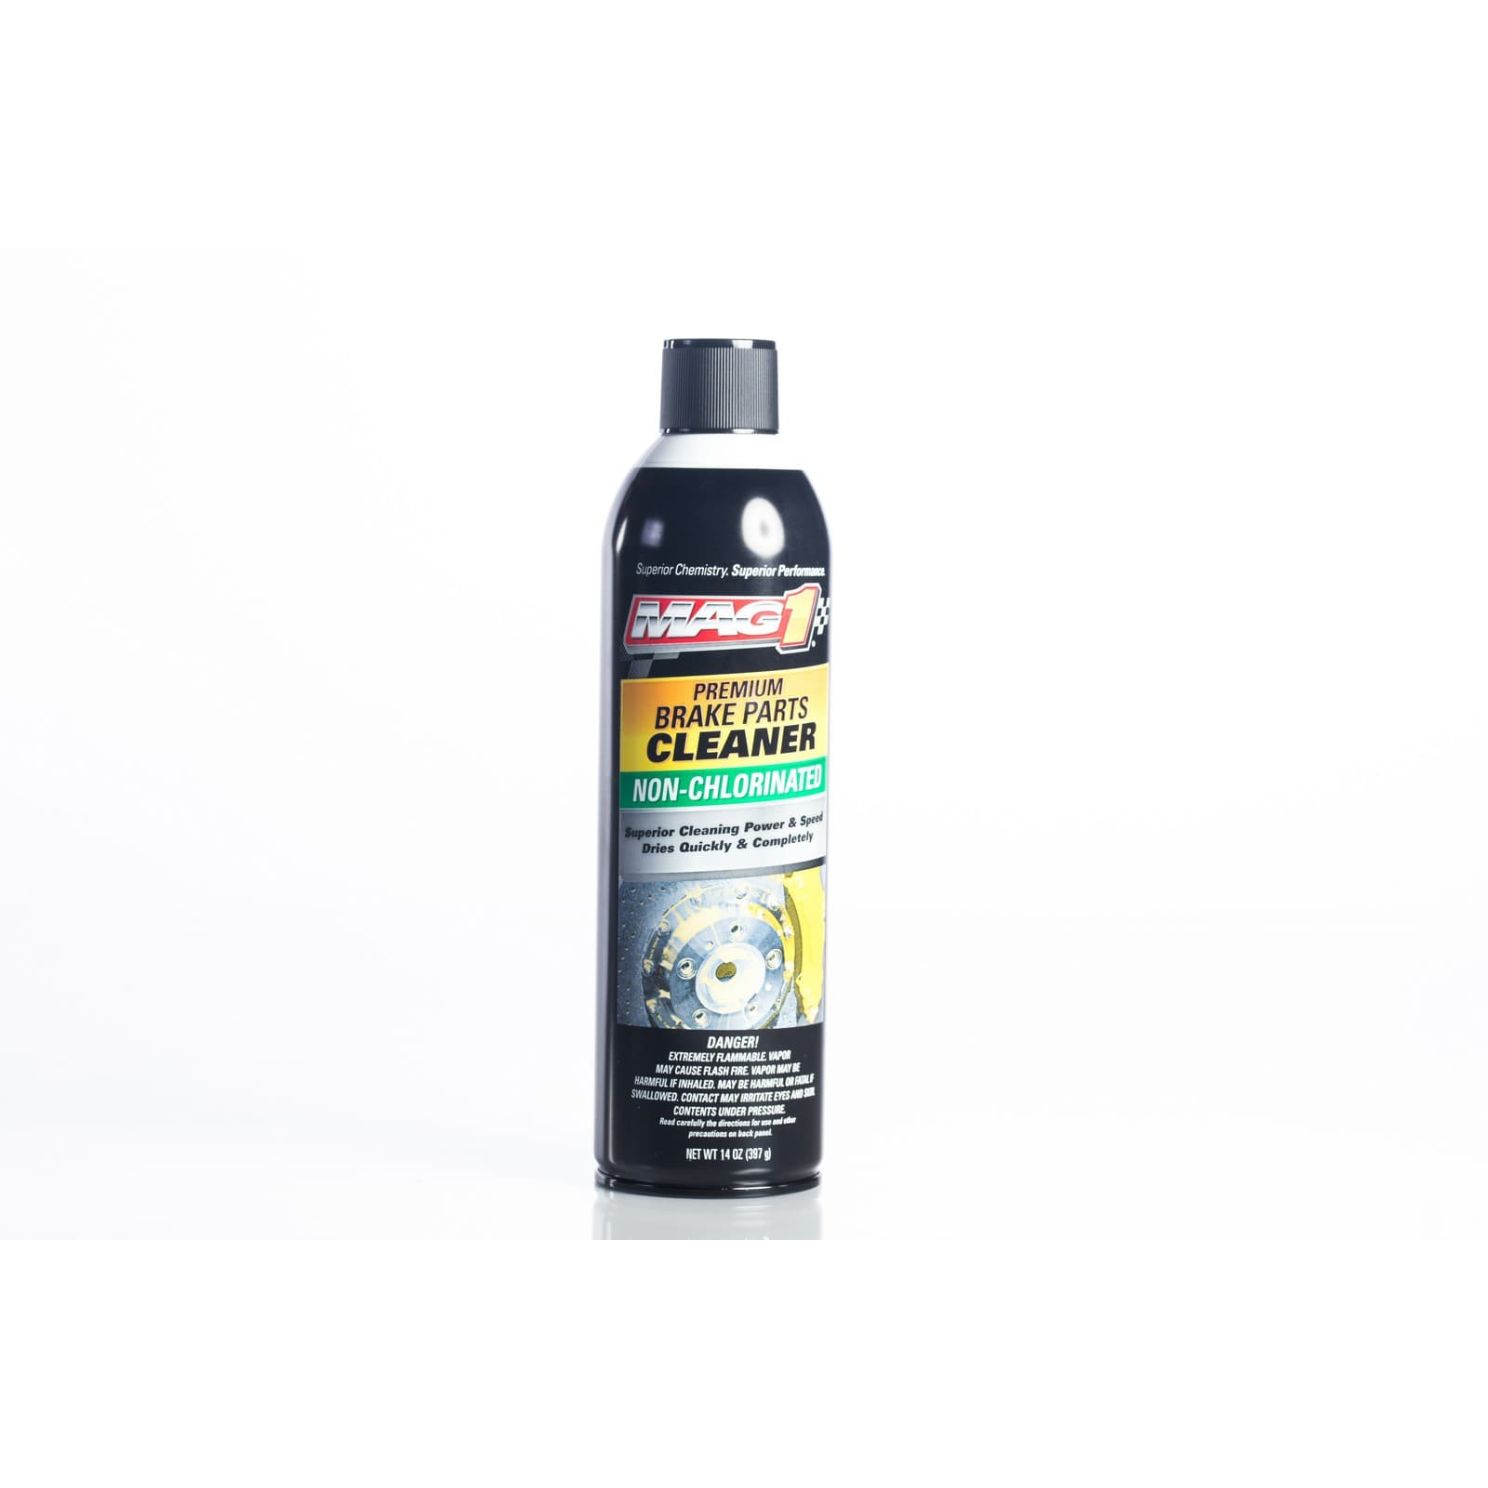 Any recommendations for a pressurized sprayer for brake cleaner?